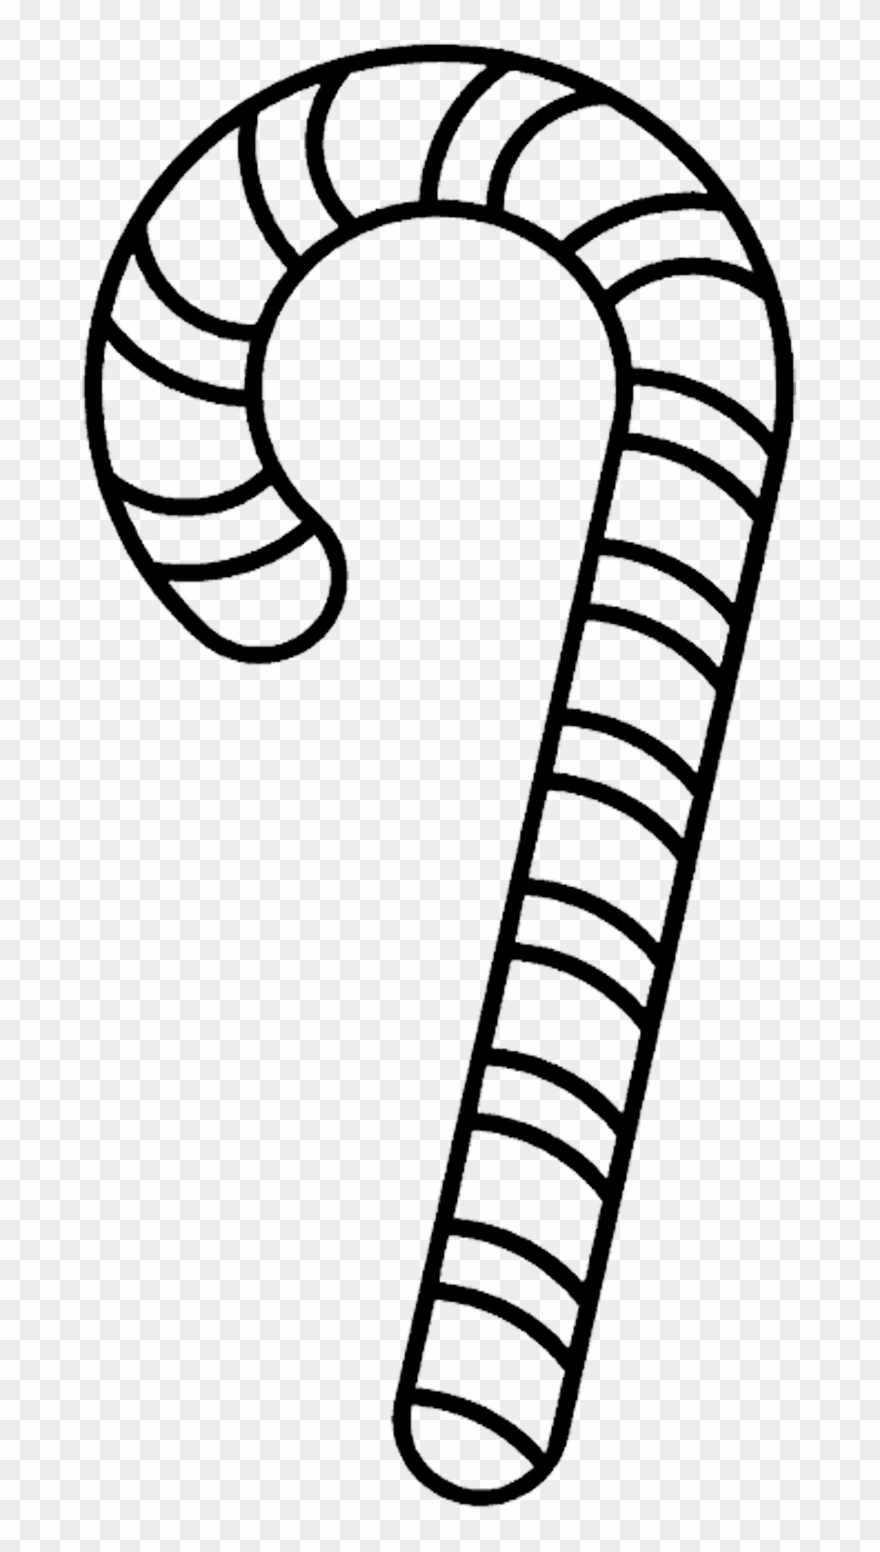 Candy Cane Clipart Black And White.